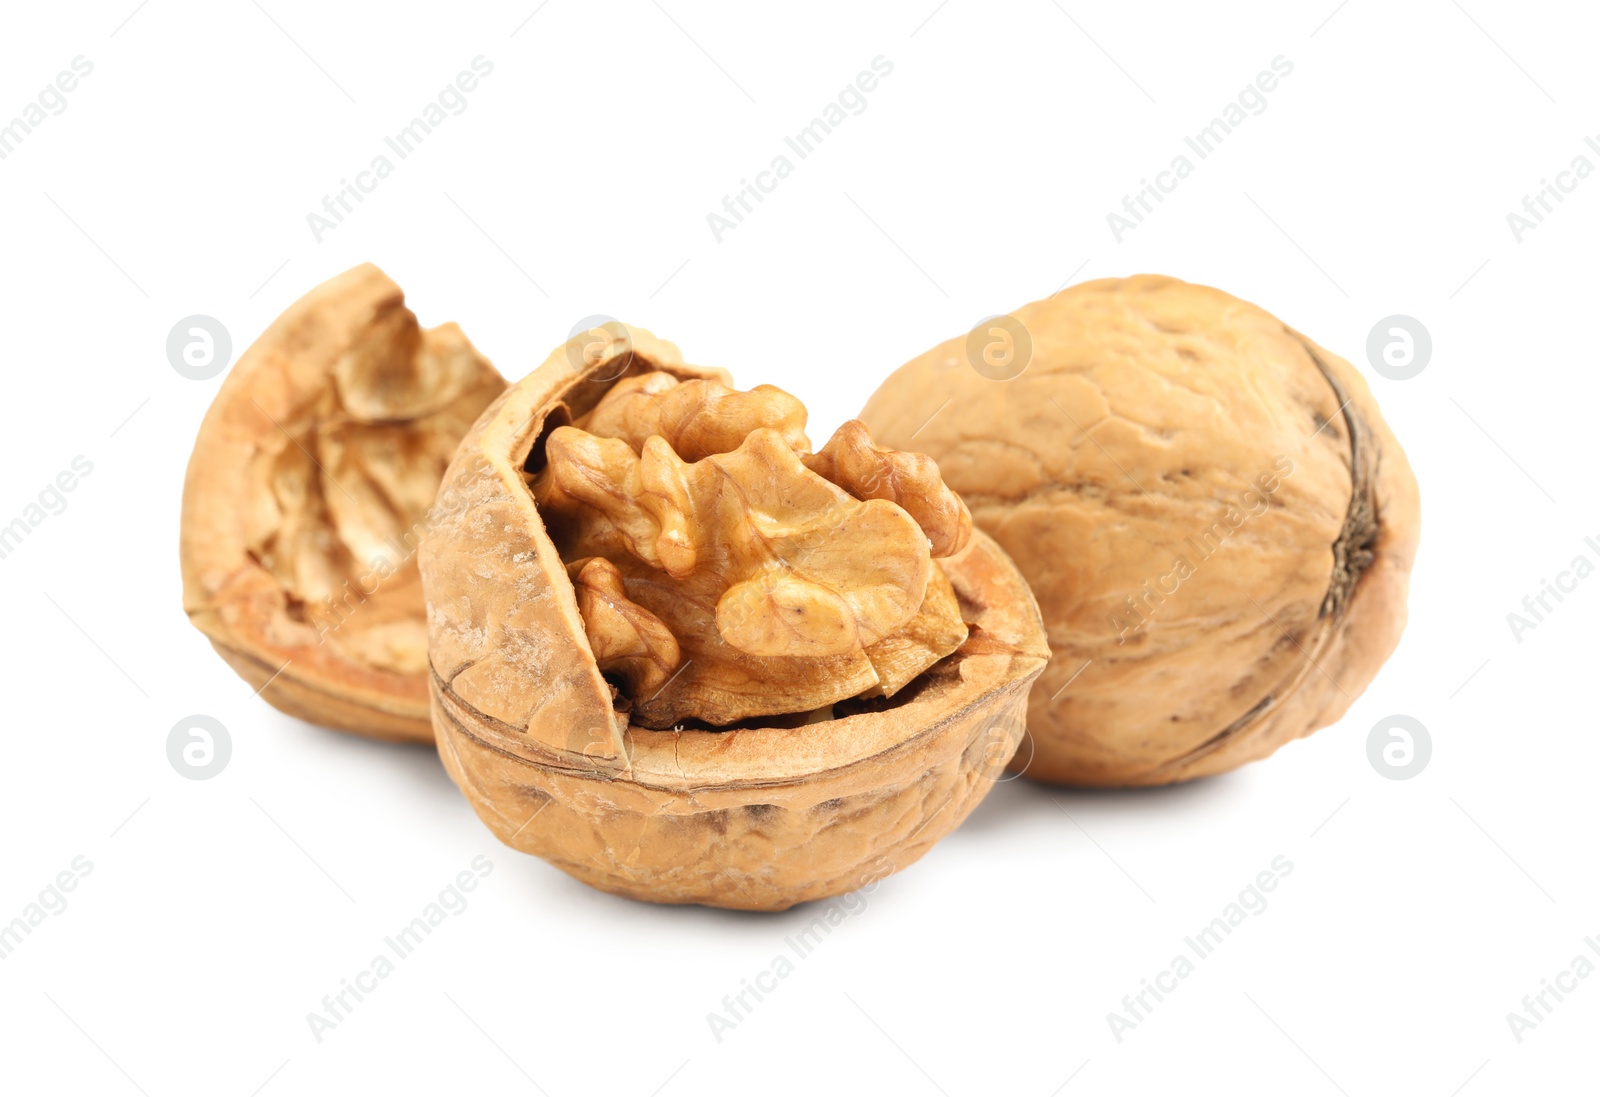 Photo of Fresh ripe walnuts in shell on white background